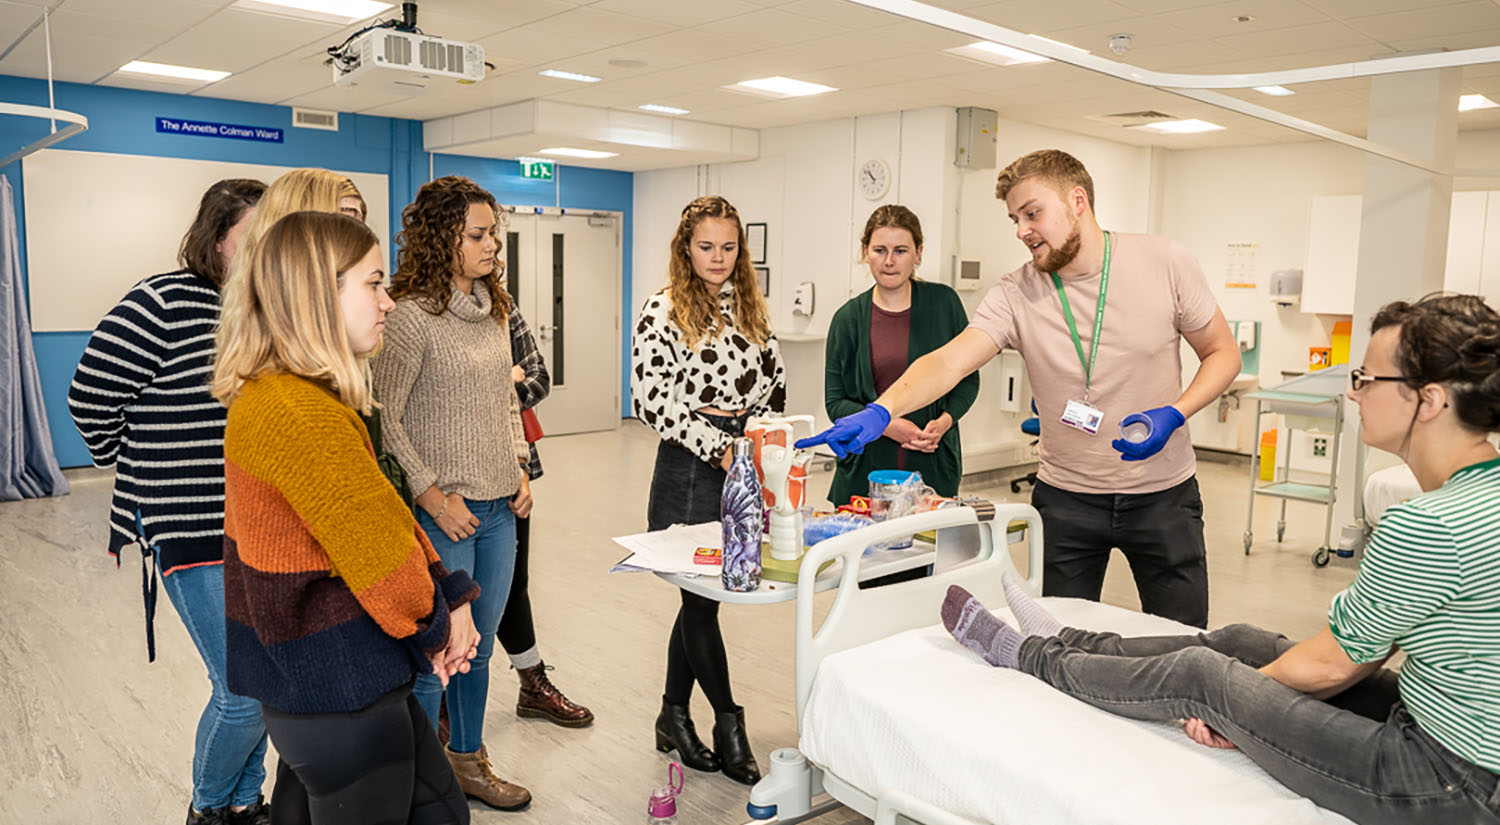 SLT students learning about anatomy in our simulation ward